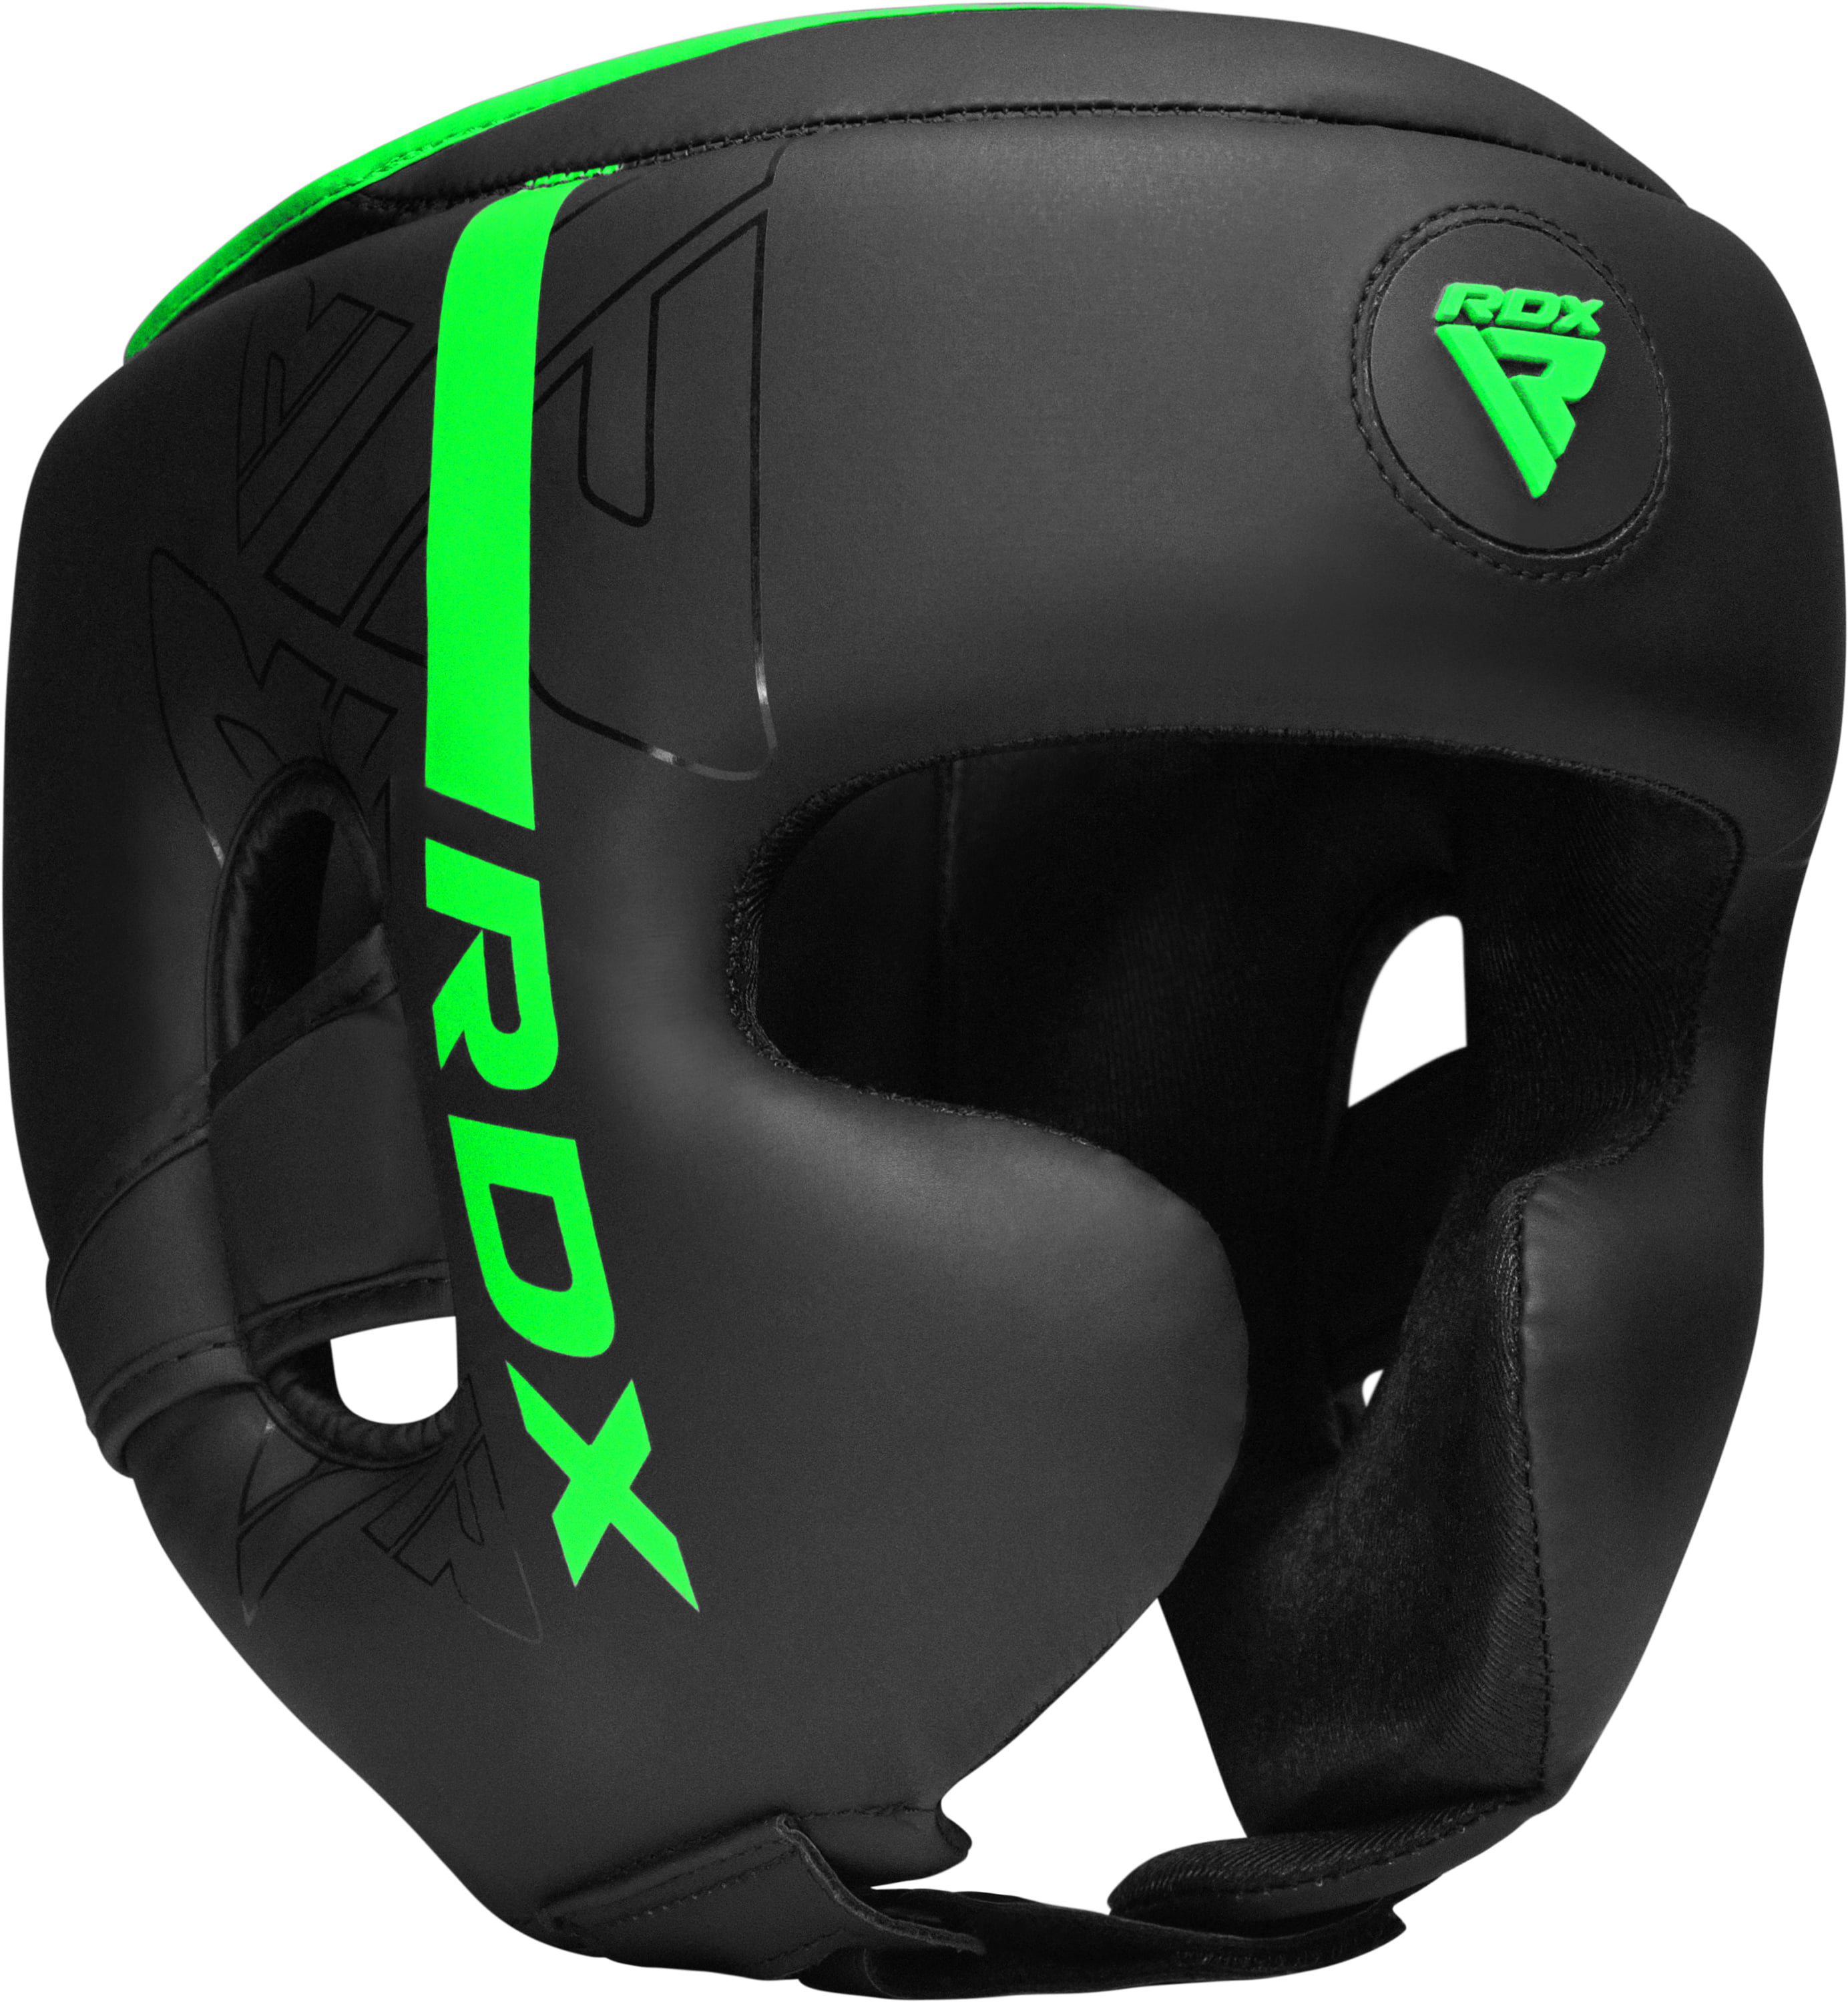 Fighting Martial Arts Matte Black RDX Headguard for Boxing Training Padded Head Guard for Face Karate Taekwondo BJJ Cheeks and Ear Protection-Headgear for Grappling Kickboxing Muay Thai MMA